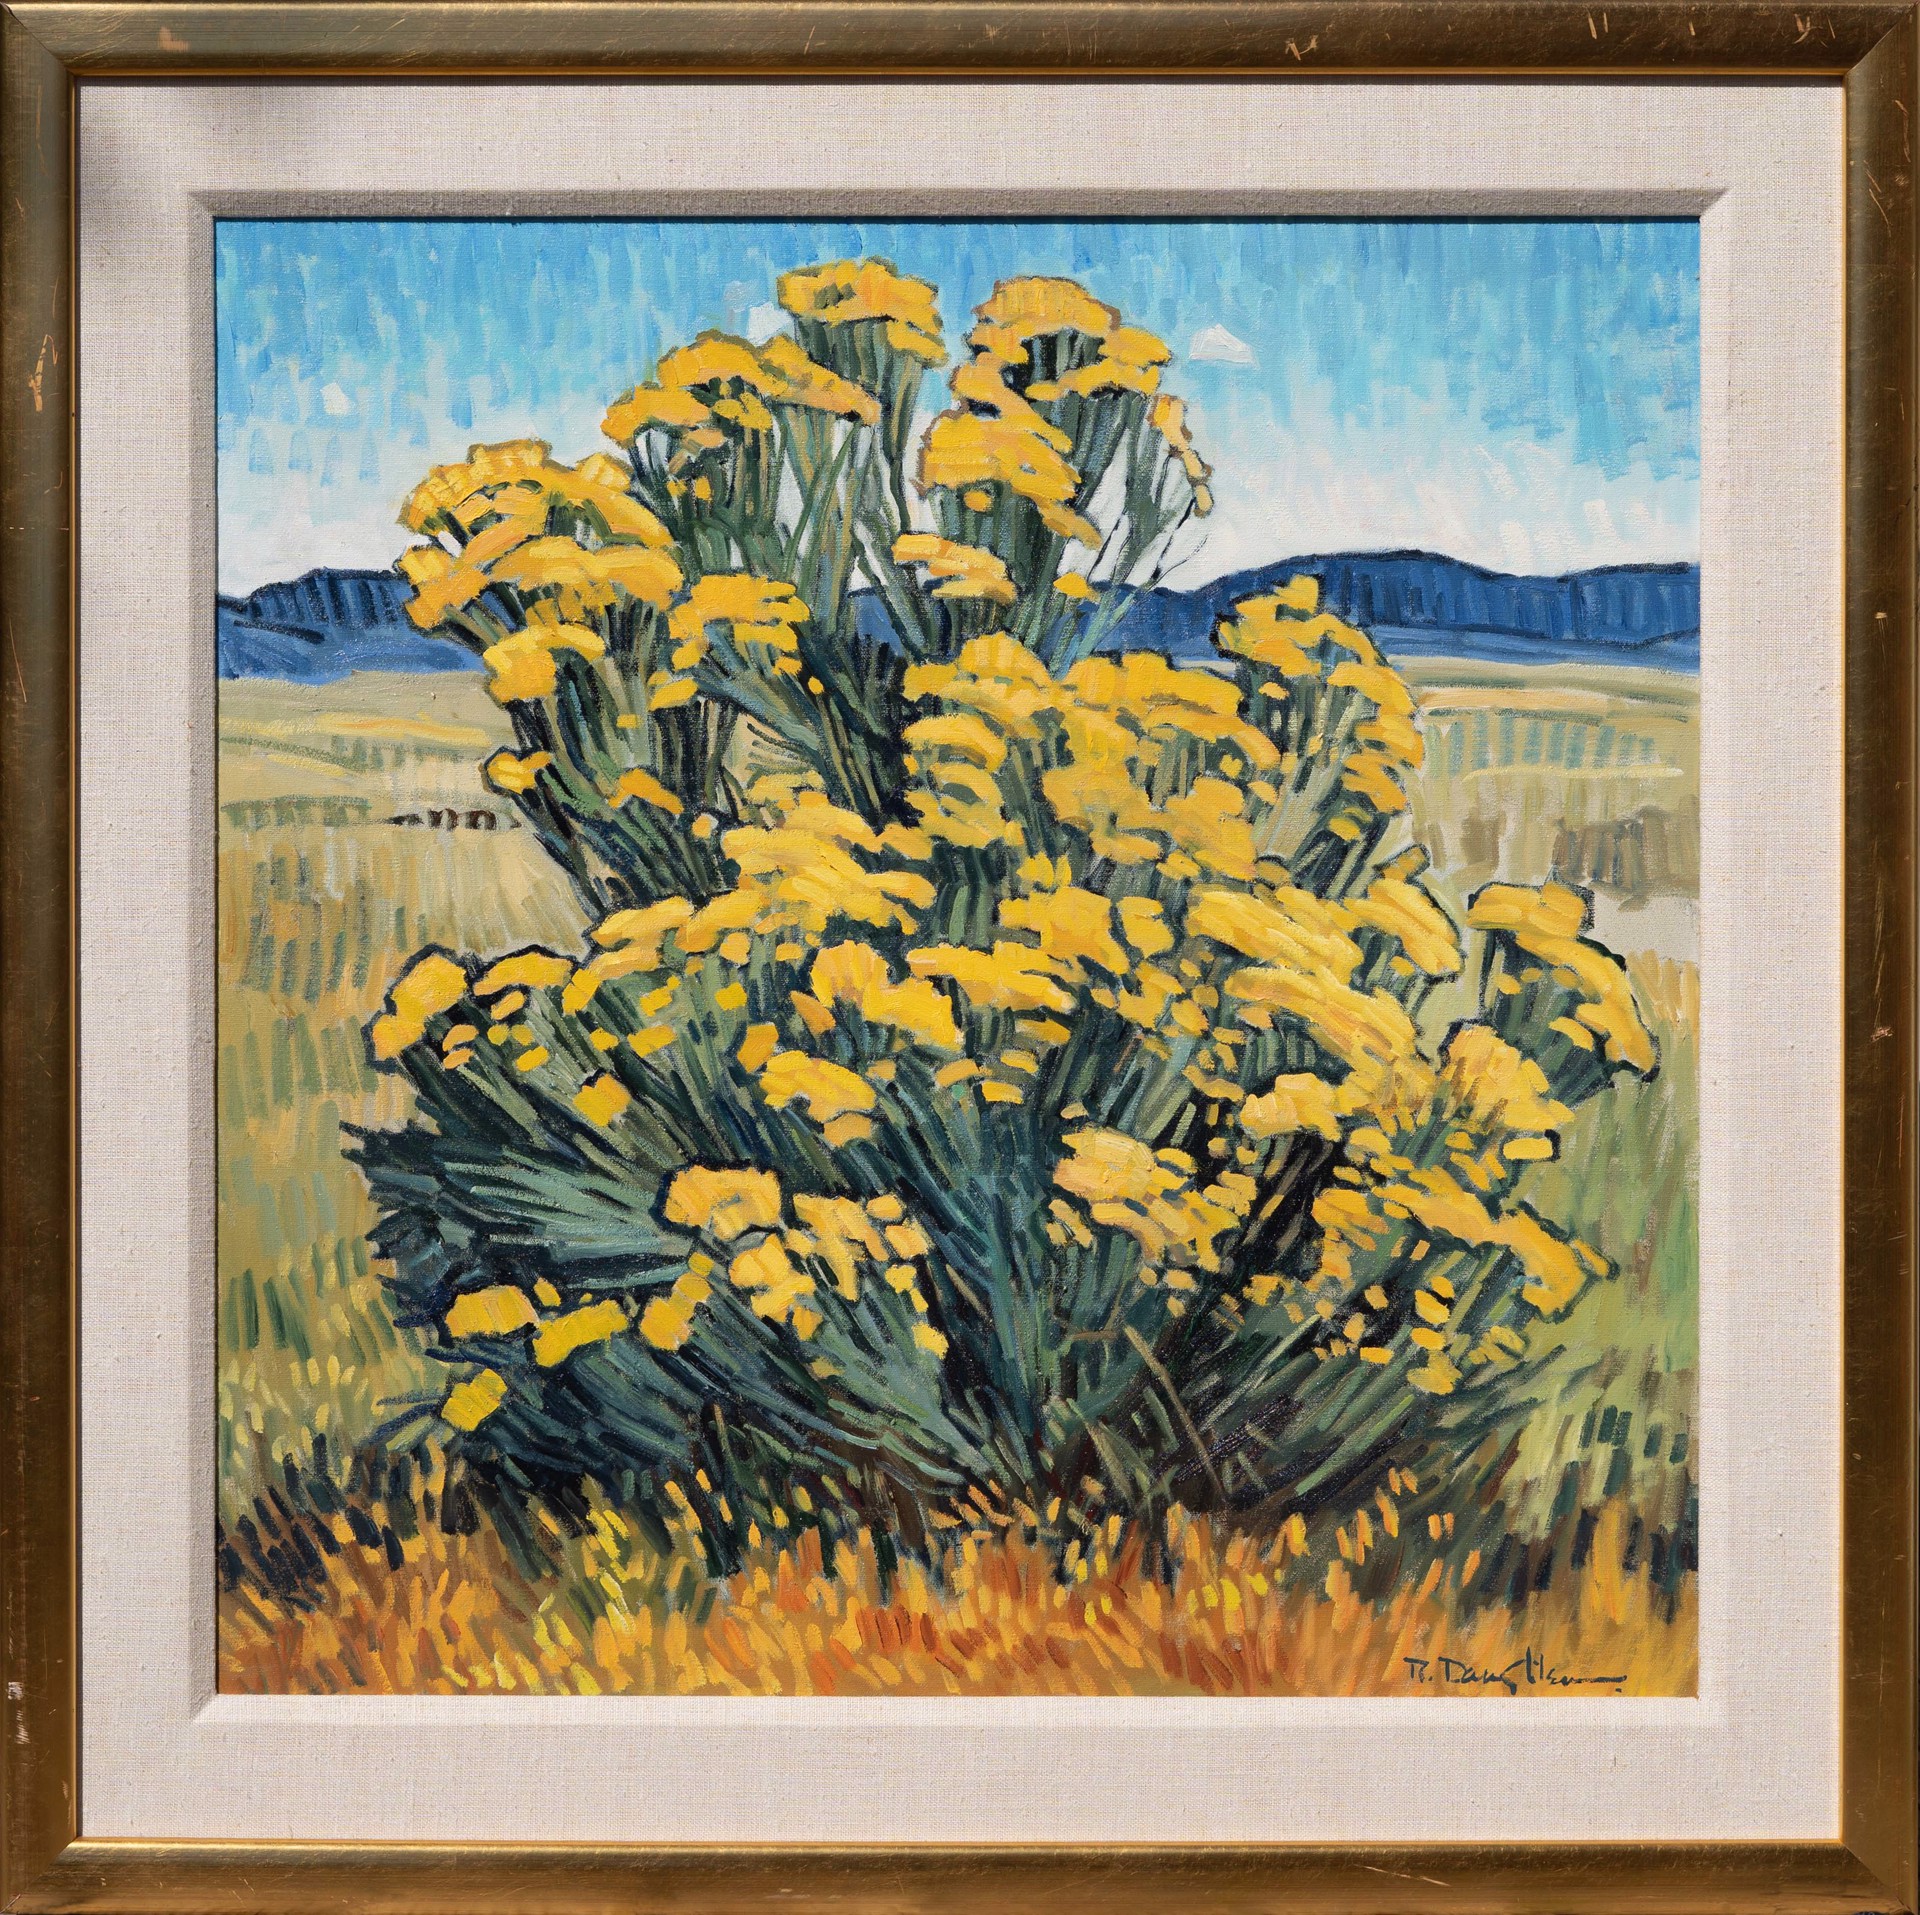 Mountain Blossoms by Robert Daughters (1929-2013)